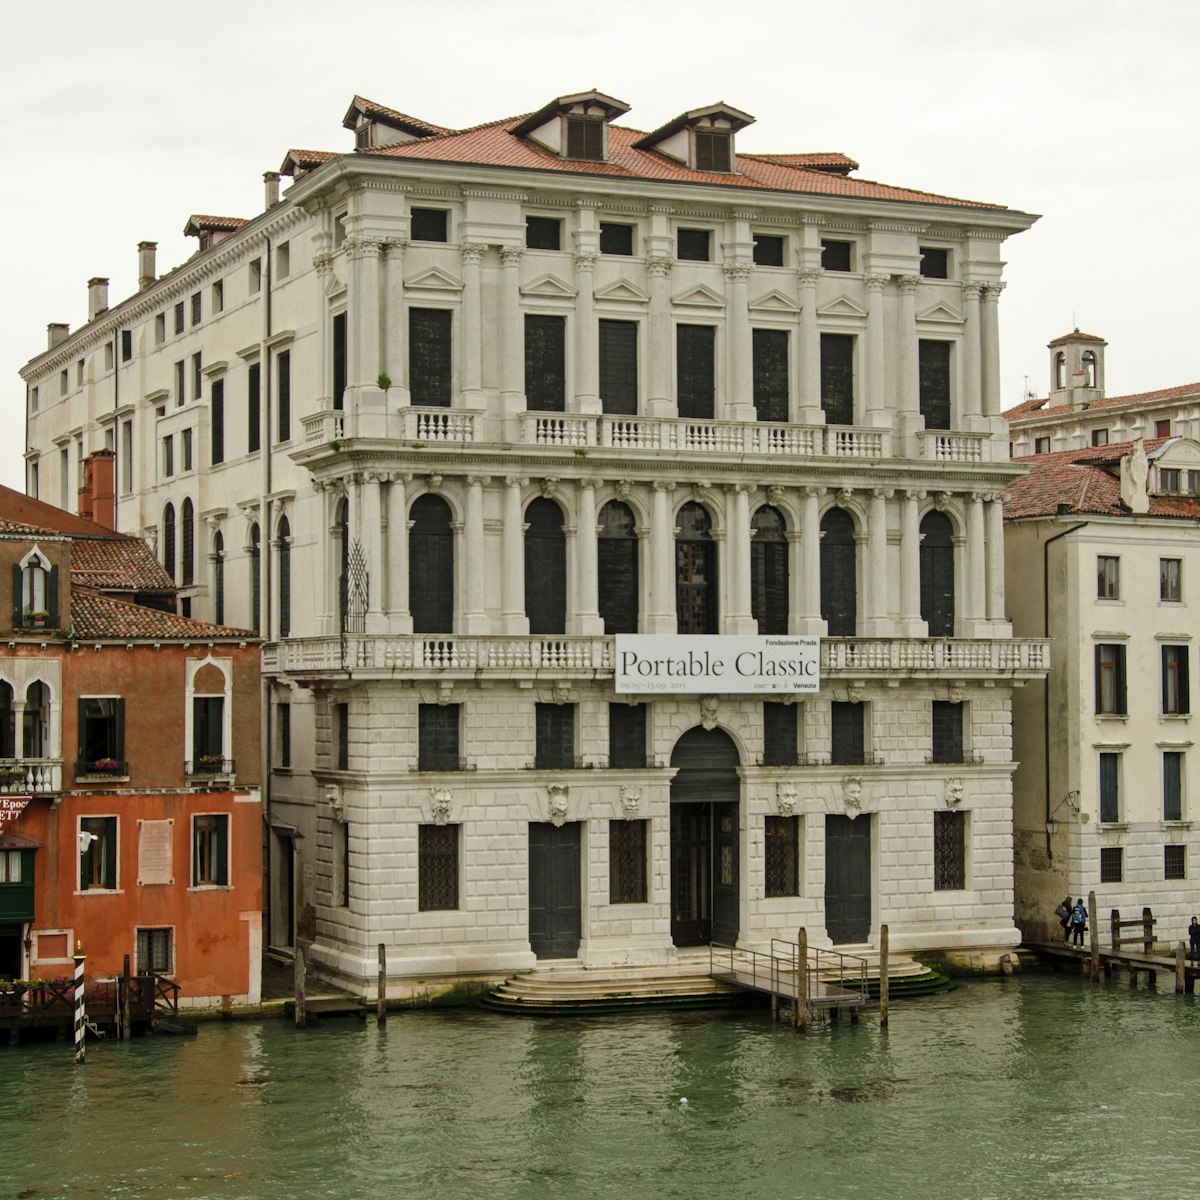 Venice, Italy - May 22, 2015: View across the Grand Canal of the new art gallery Fondazione Prada in Venice, Italy.  On a rainy day in May.
477533506
Prada, Building Exterior, Overcast, Art, Art Museum, Urban Scene, Outdoors, Horizontal, Image, Grand Canal - Venice, Venice - Italy, Veneto, Italy, Springtime, Rain, Water, Canal, City, Nautical Vessel, May